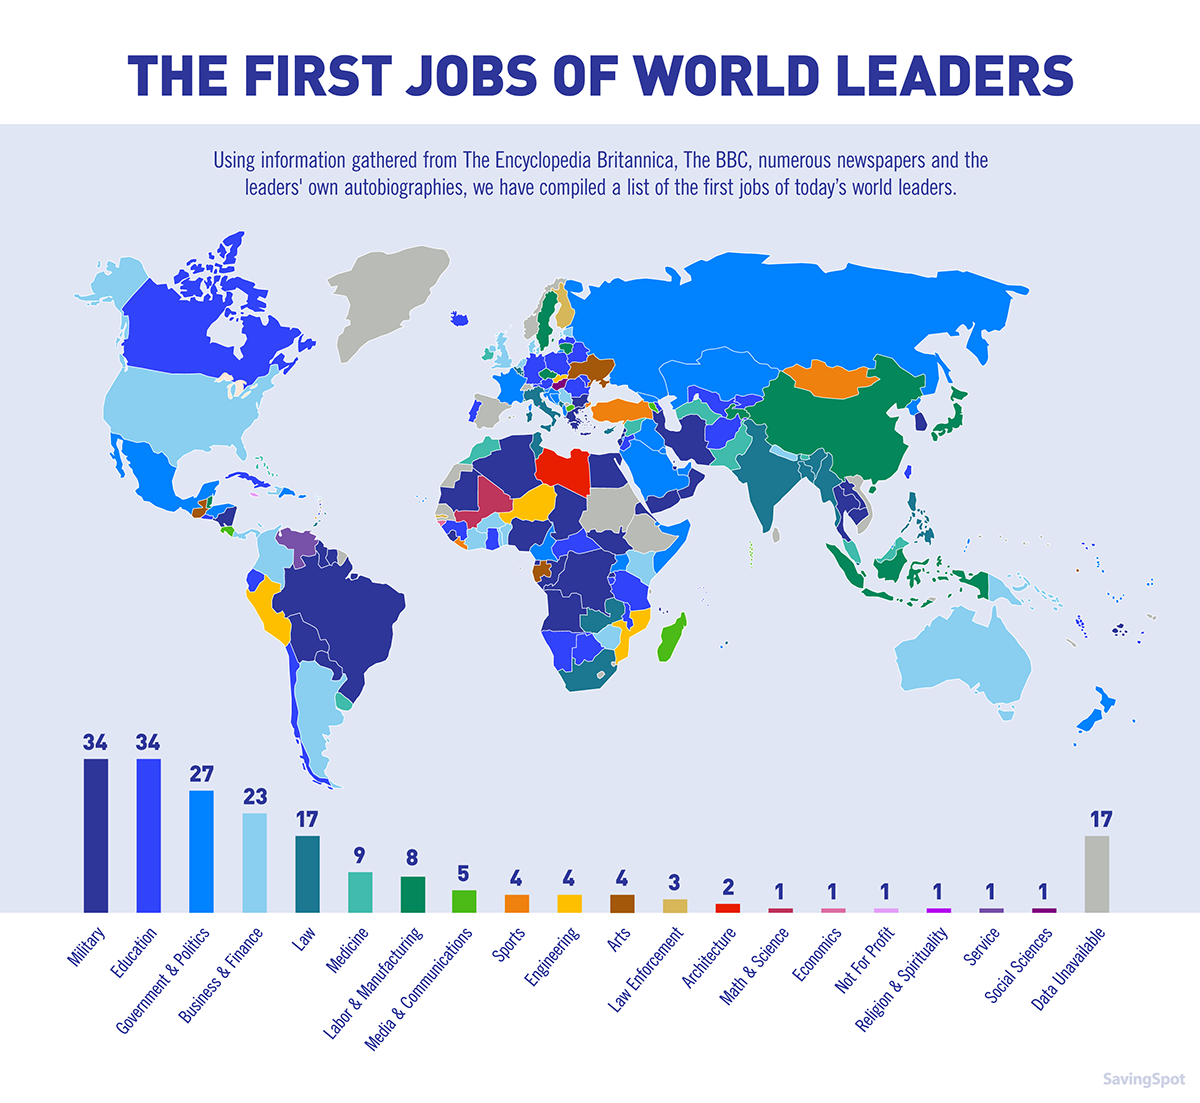 The first jobs of the world's leaders